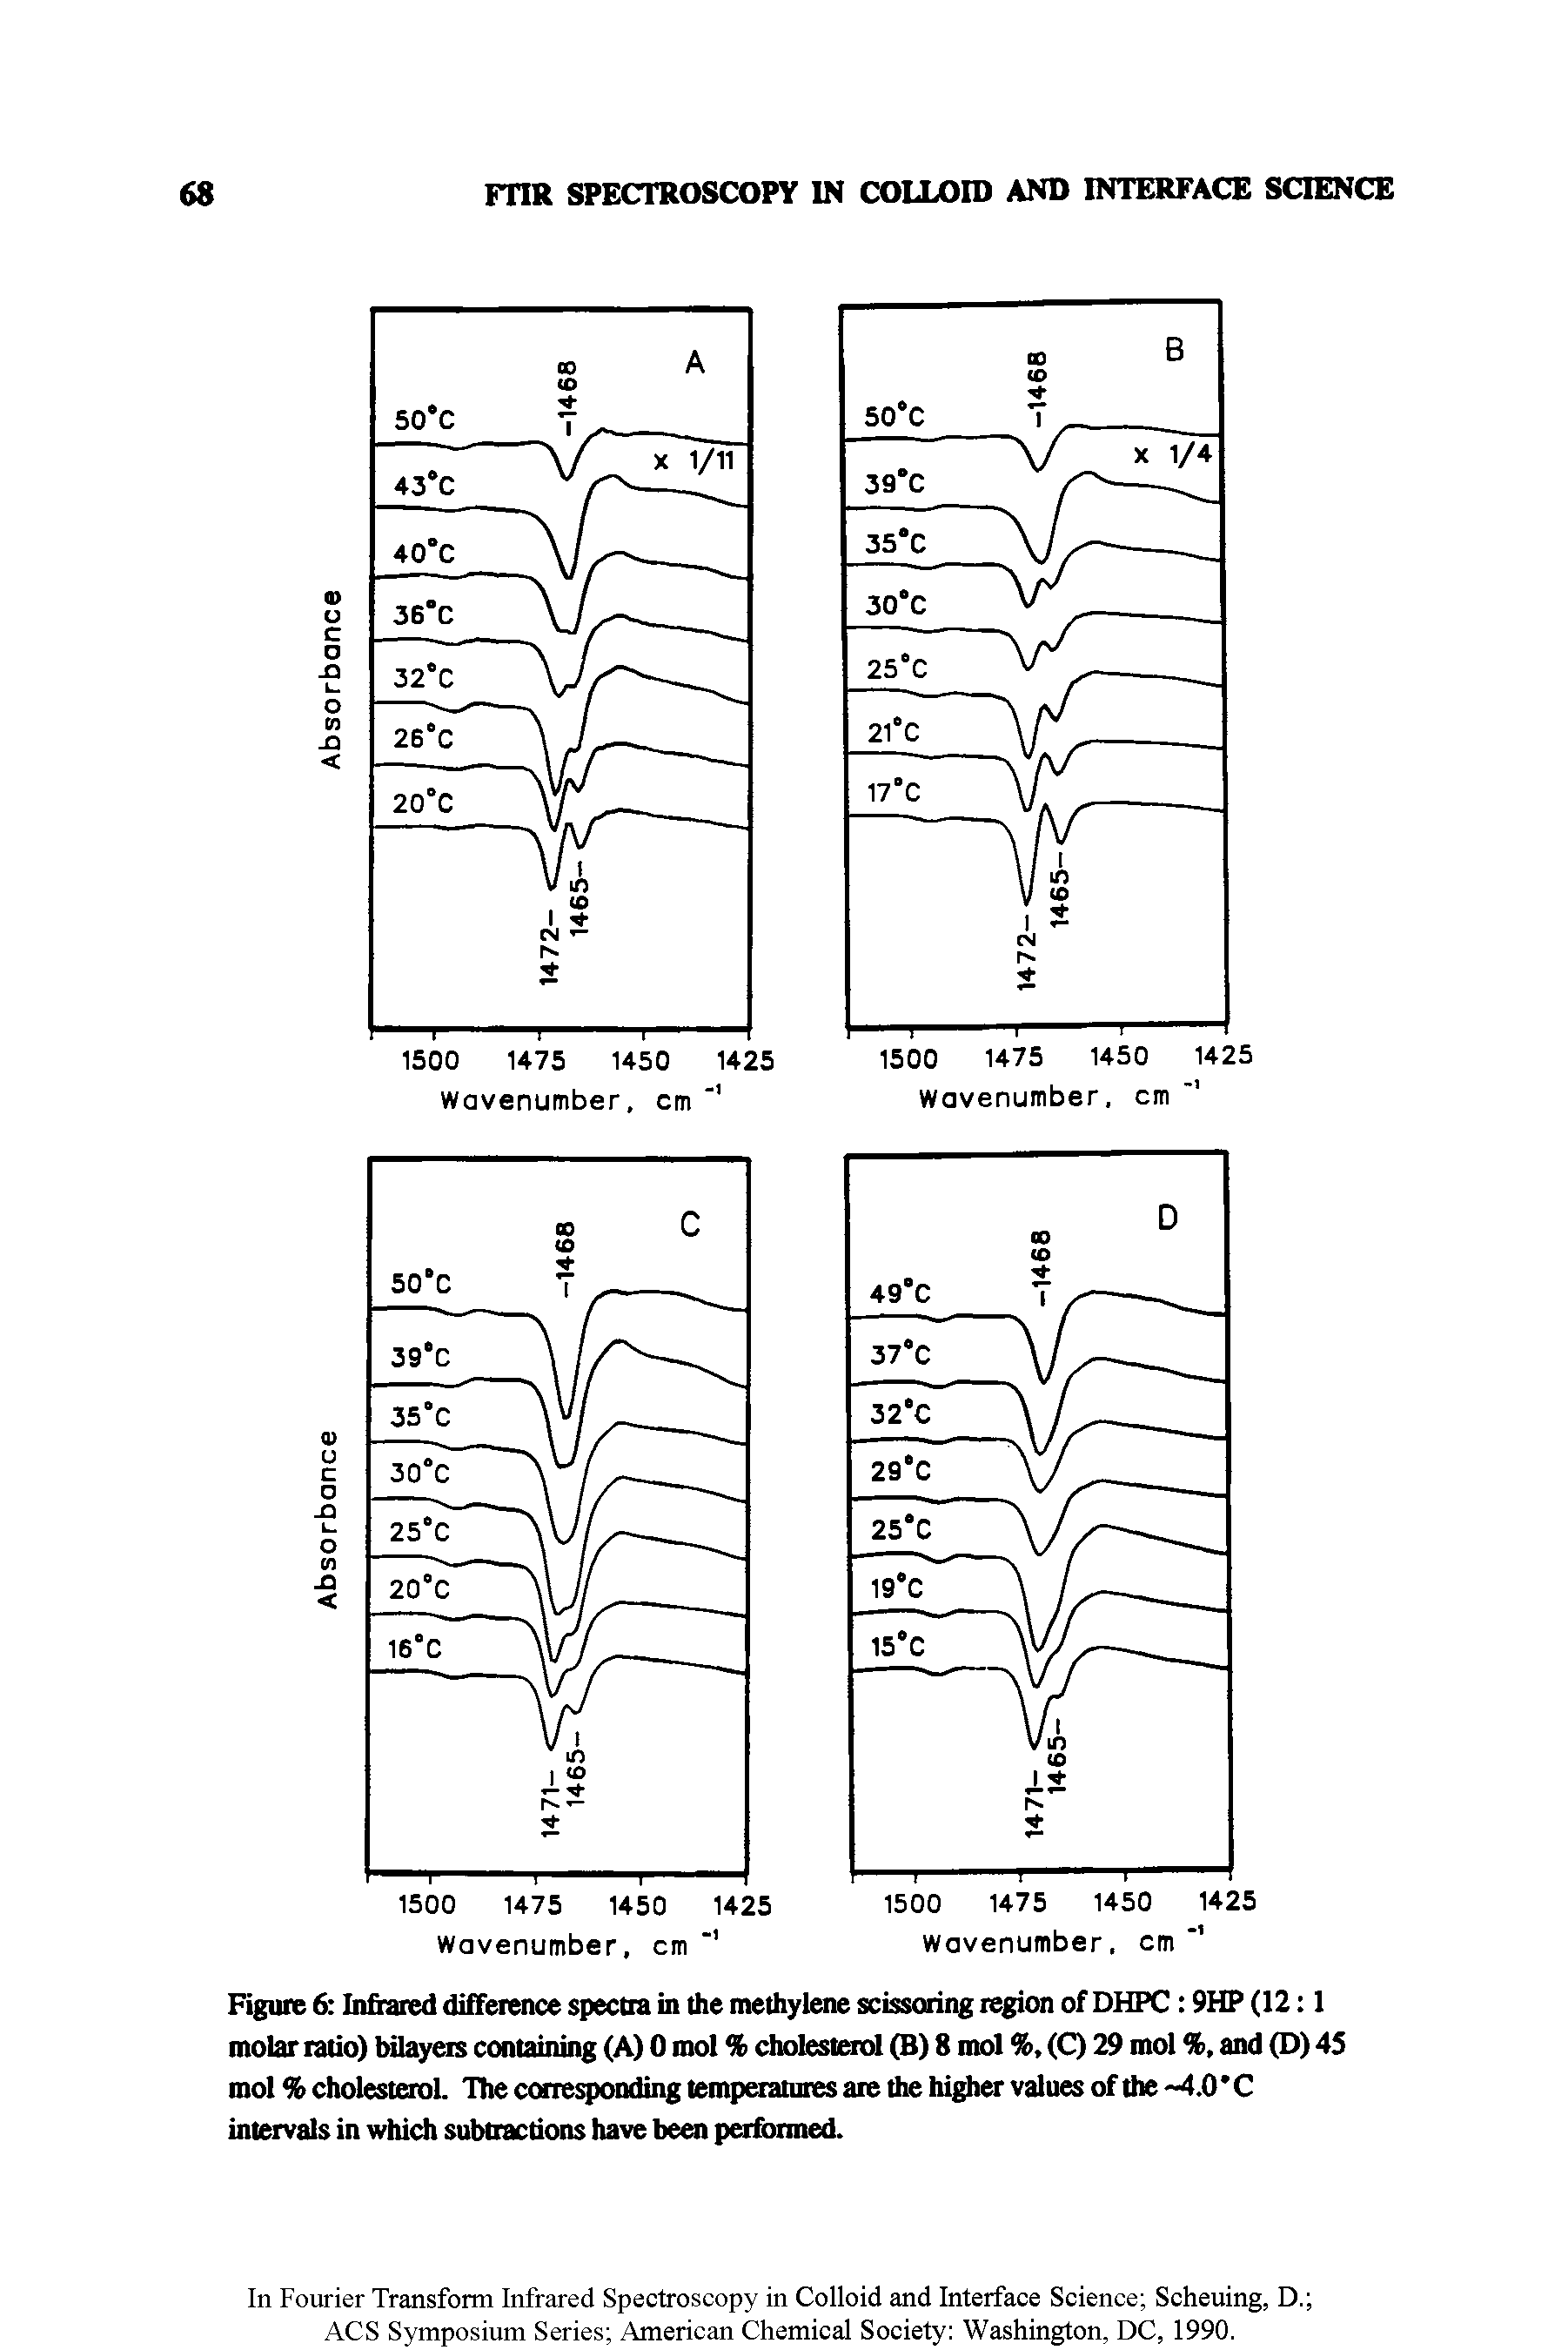 Figure 6 Infrared difference spectra in the methylene scissoring region of DHPC 9HP (12 1 molar ratio) bilayeis containing (A) 0 mol % cholesterol (B) 8 mol %, (C) 29 mol %, and (D) 45 mol % cholesterol. The corresponding temperatures are the higher values of the 4.0 C intervals in which subtractions have been performed.